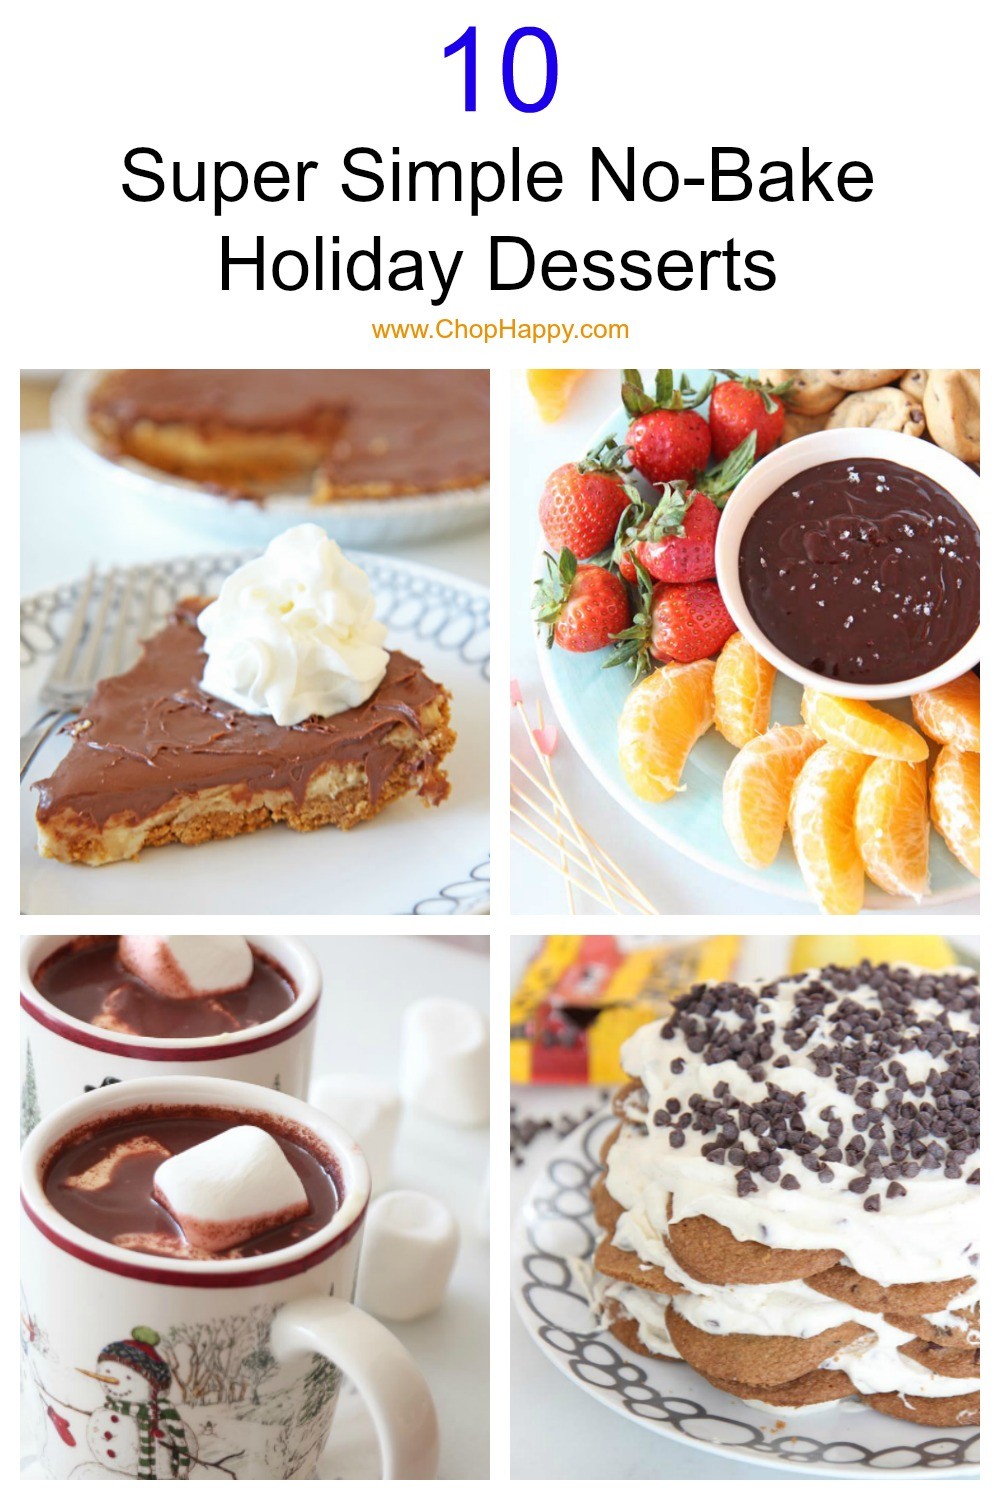 10 Super Simple No-Bake Holiday Desserts. This is for all my fellow busy holiday dinner makers. All these desserts can be made or prepped in advance. Happy Baking and dessert making! www.ChopHappy.com #dessert #nobakedessert